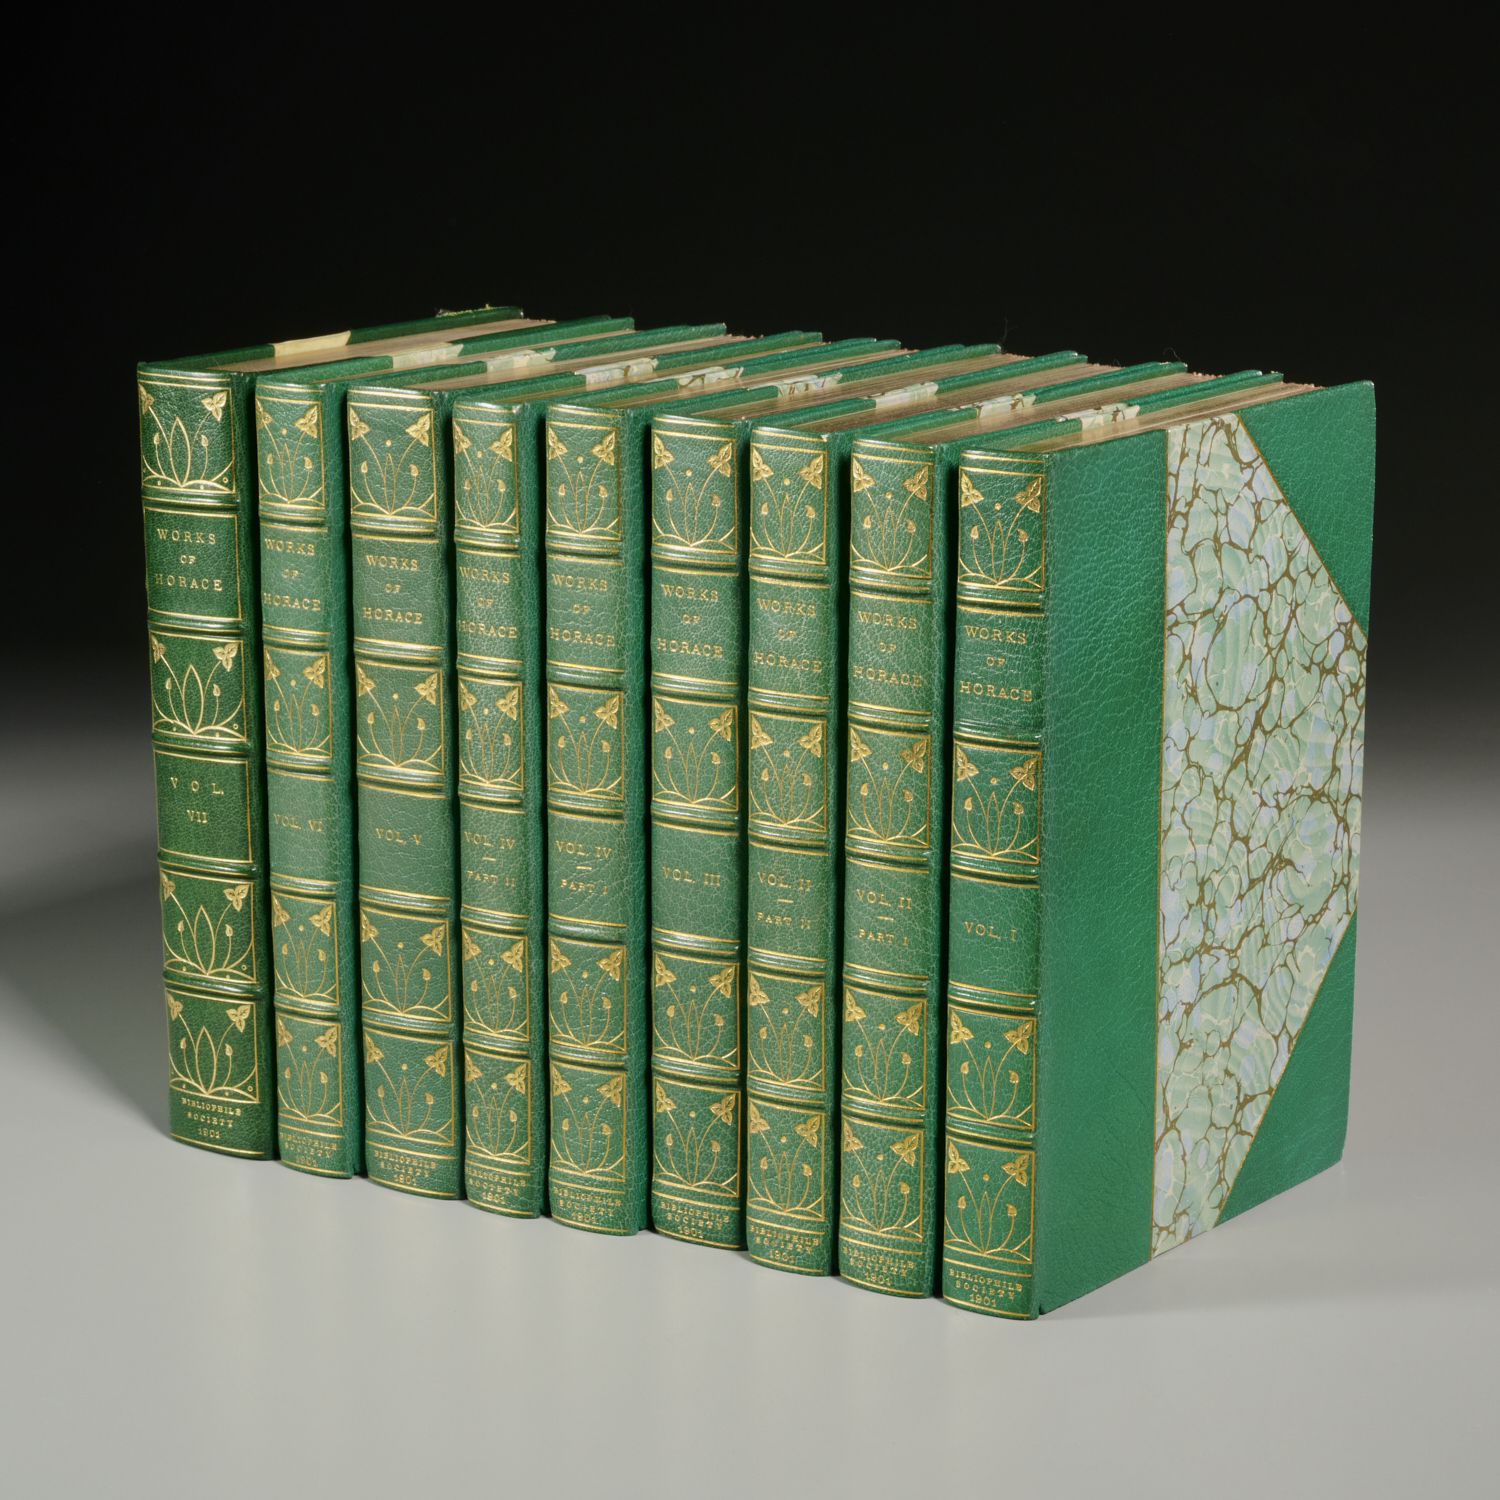 WORKS OF HORACE, BIBLIOPHILE SOCIETY,